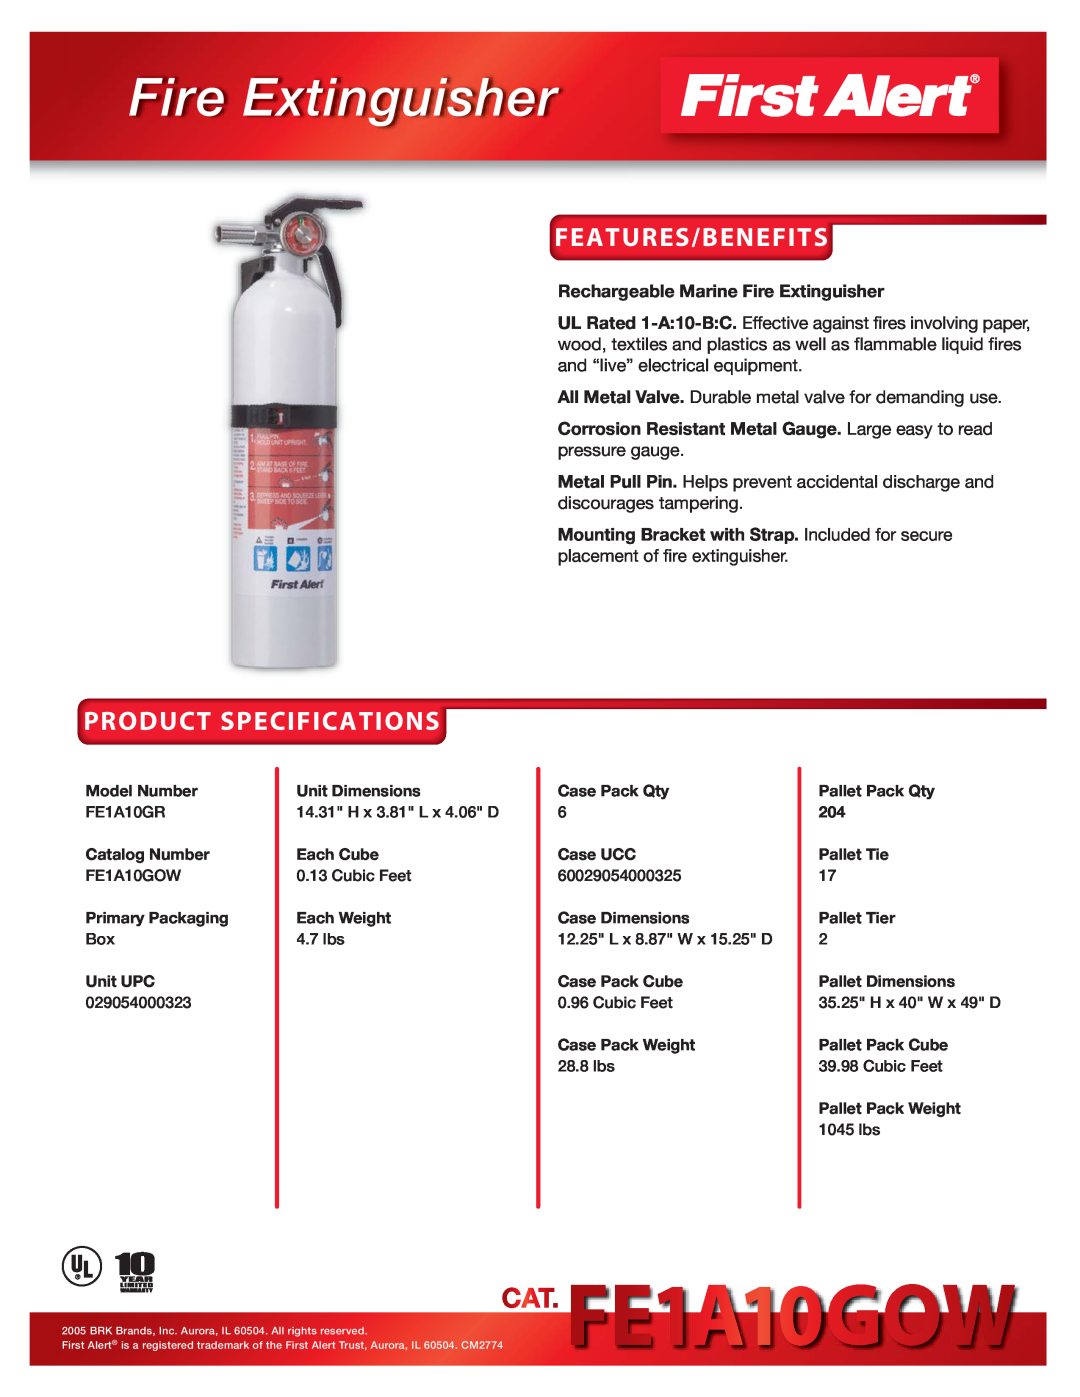 BRK electronic FE1A10GR specifications Fire Extinguisher, Features/Benefits, Product Specifications 